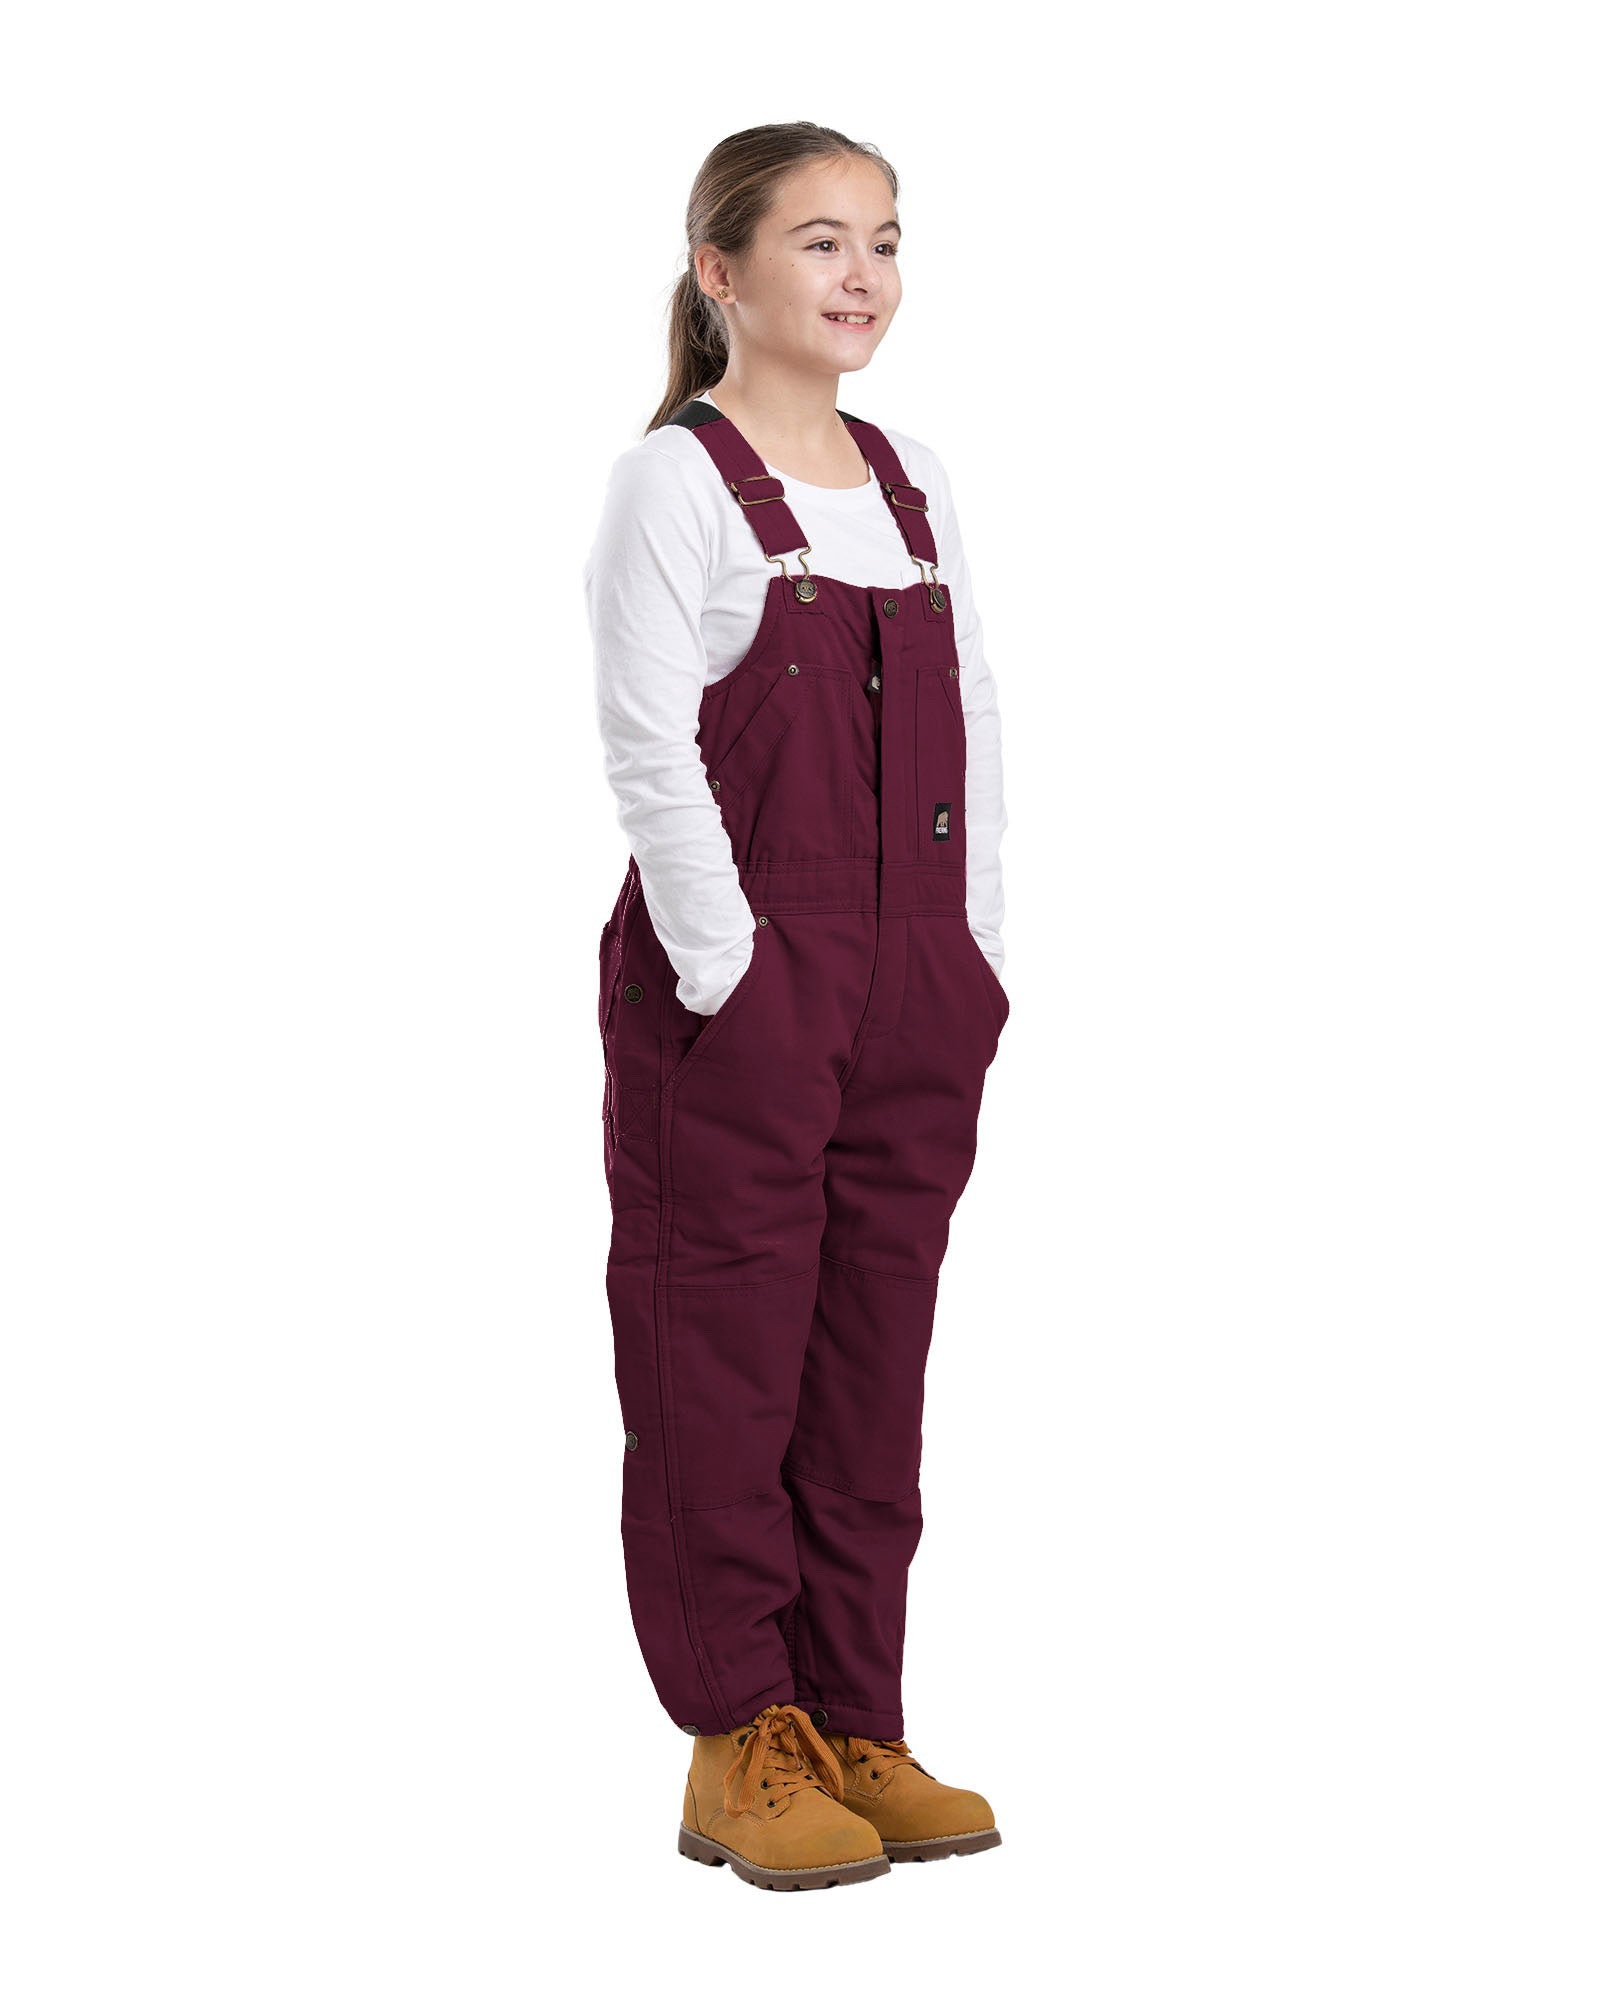 BB21PLM Youth Softstone Insulated Bib Overall